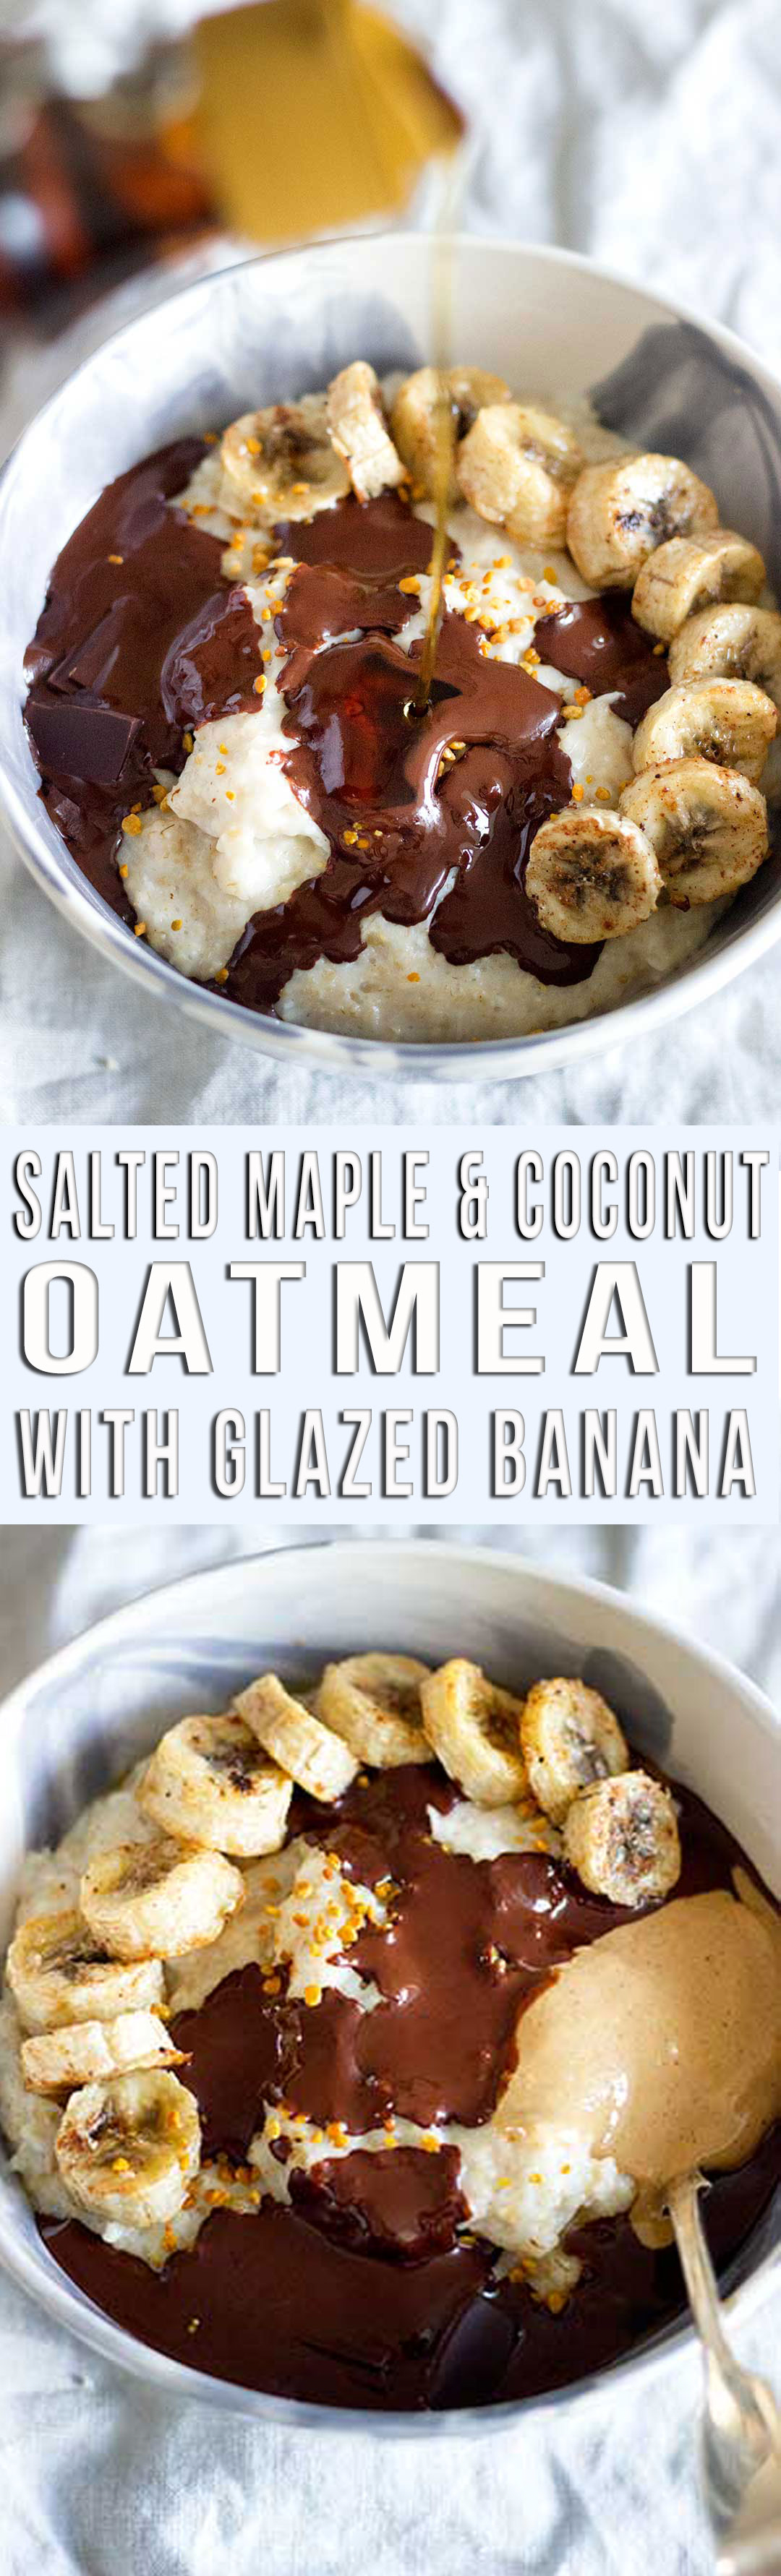 Salted Maple & Coconut Oatmeal with Glazed Banana | A simple and easy healthy breakfast!